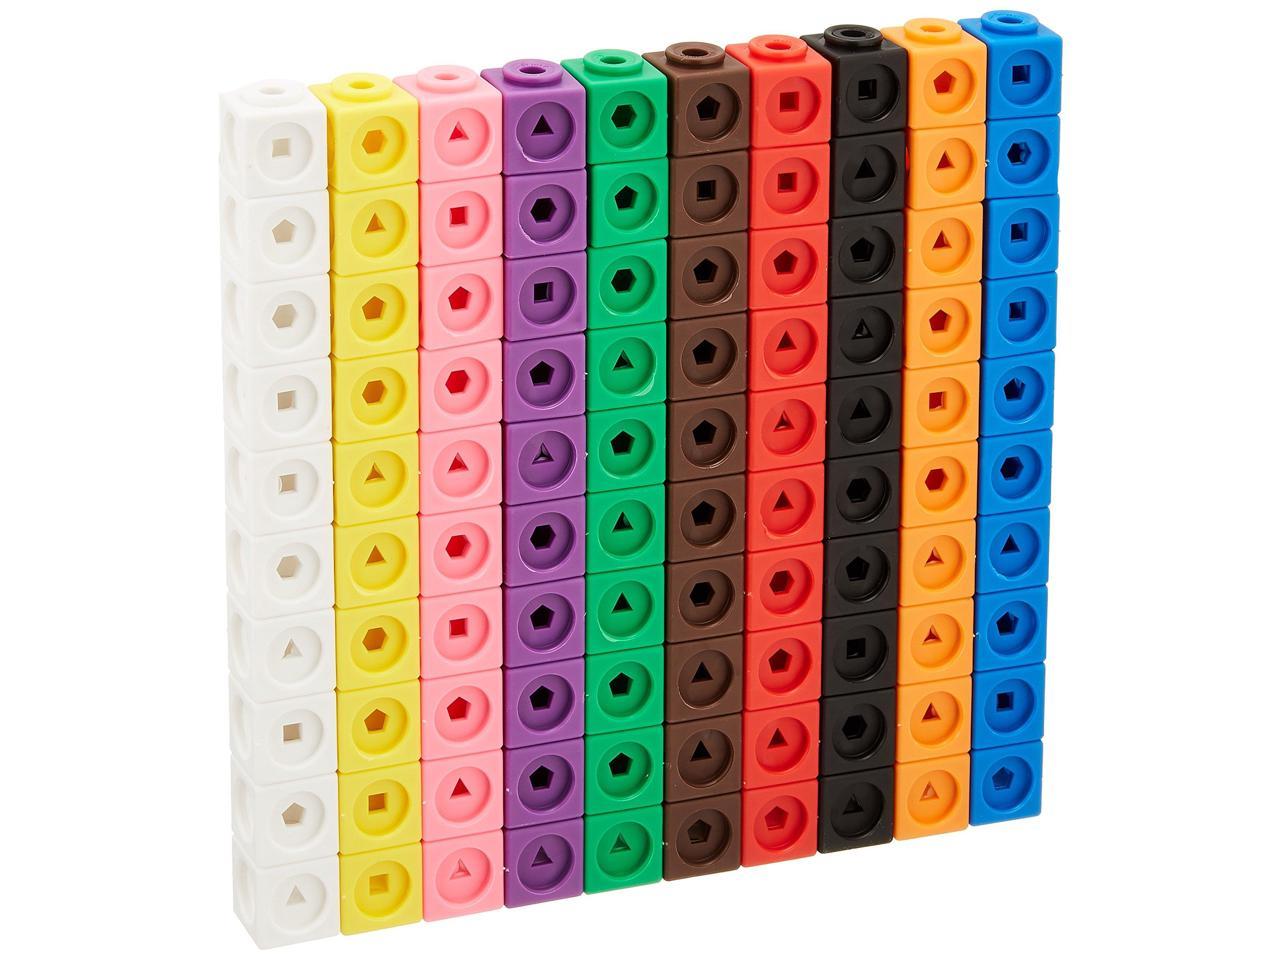 MATHLINK CUBES set 100 connecting cubes  maths muliplication division learning 